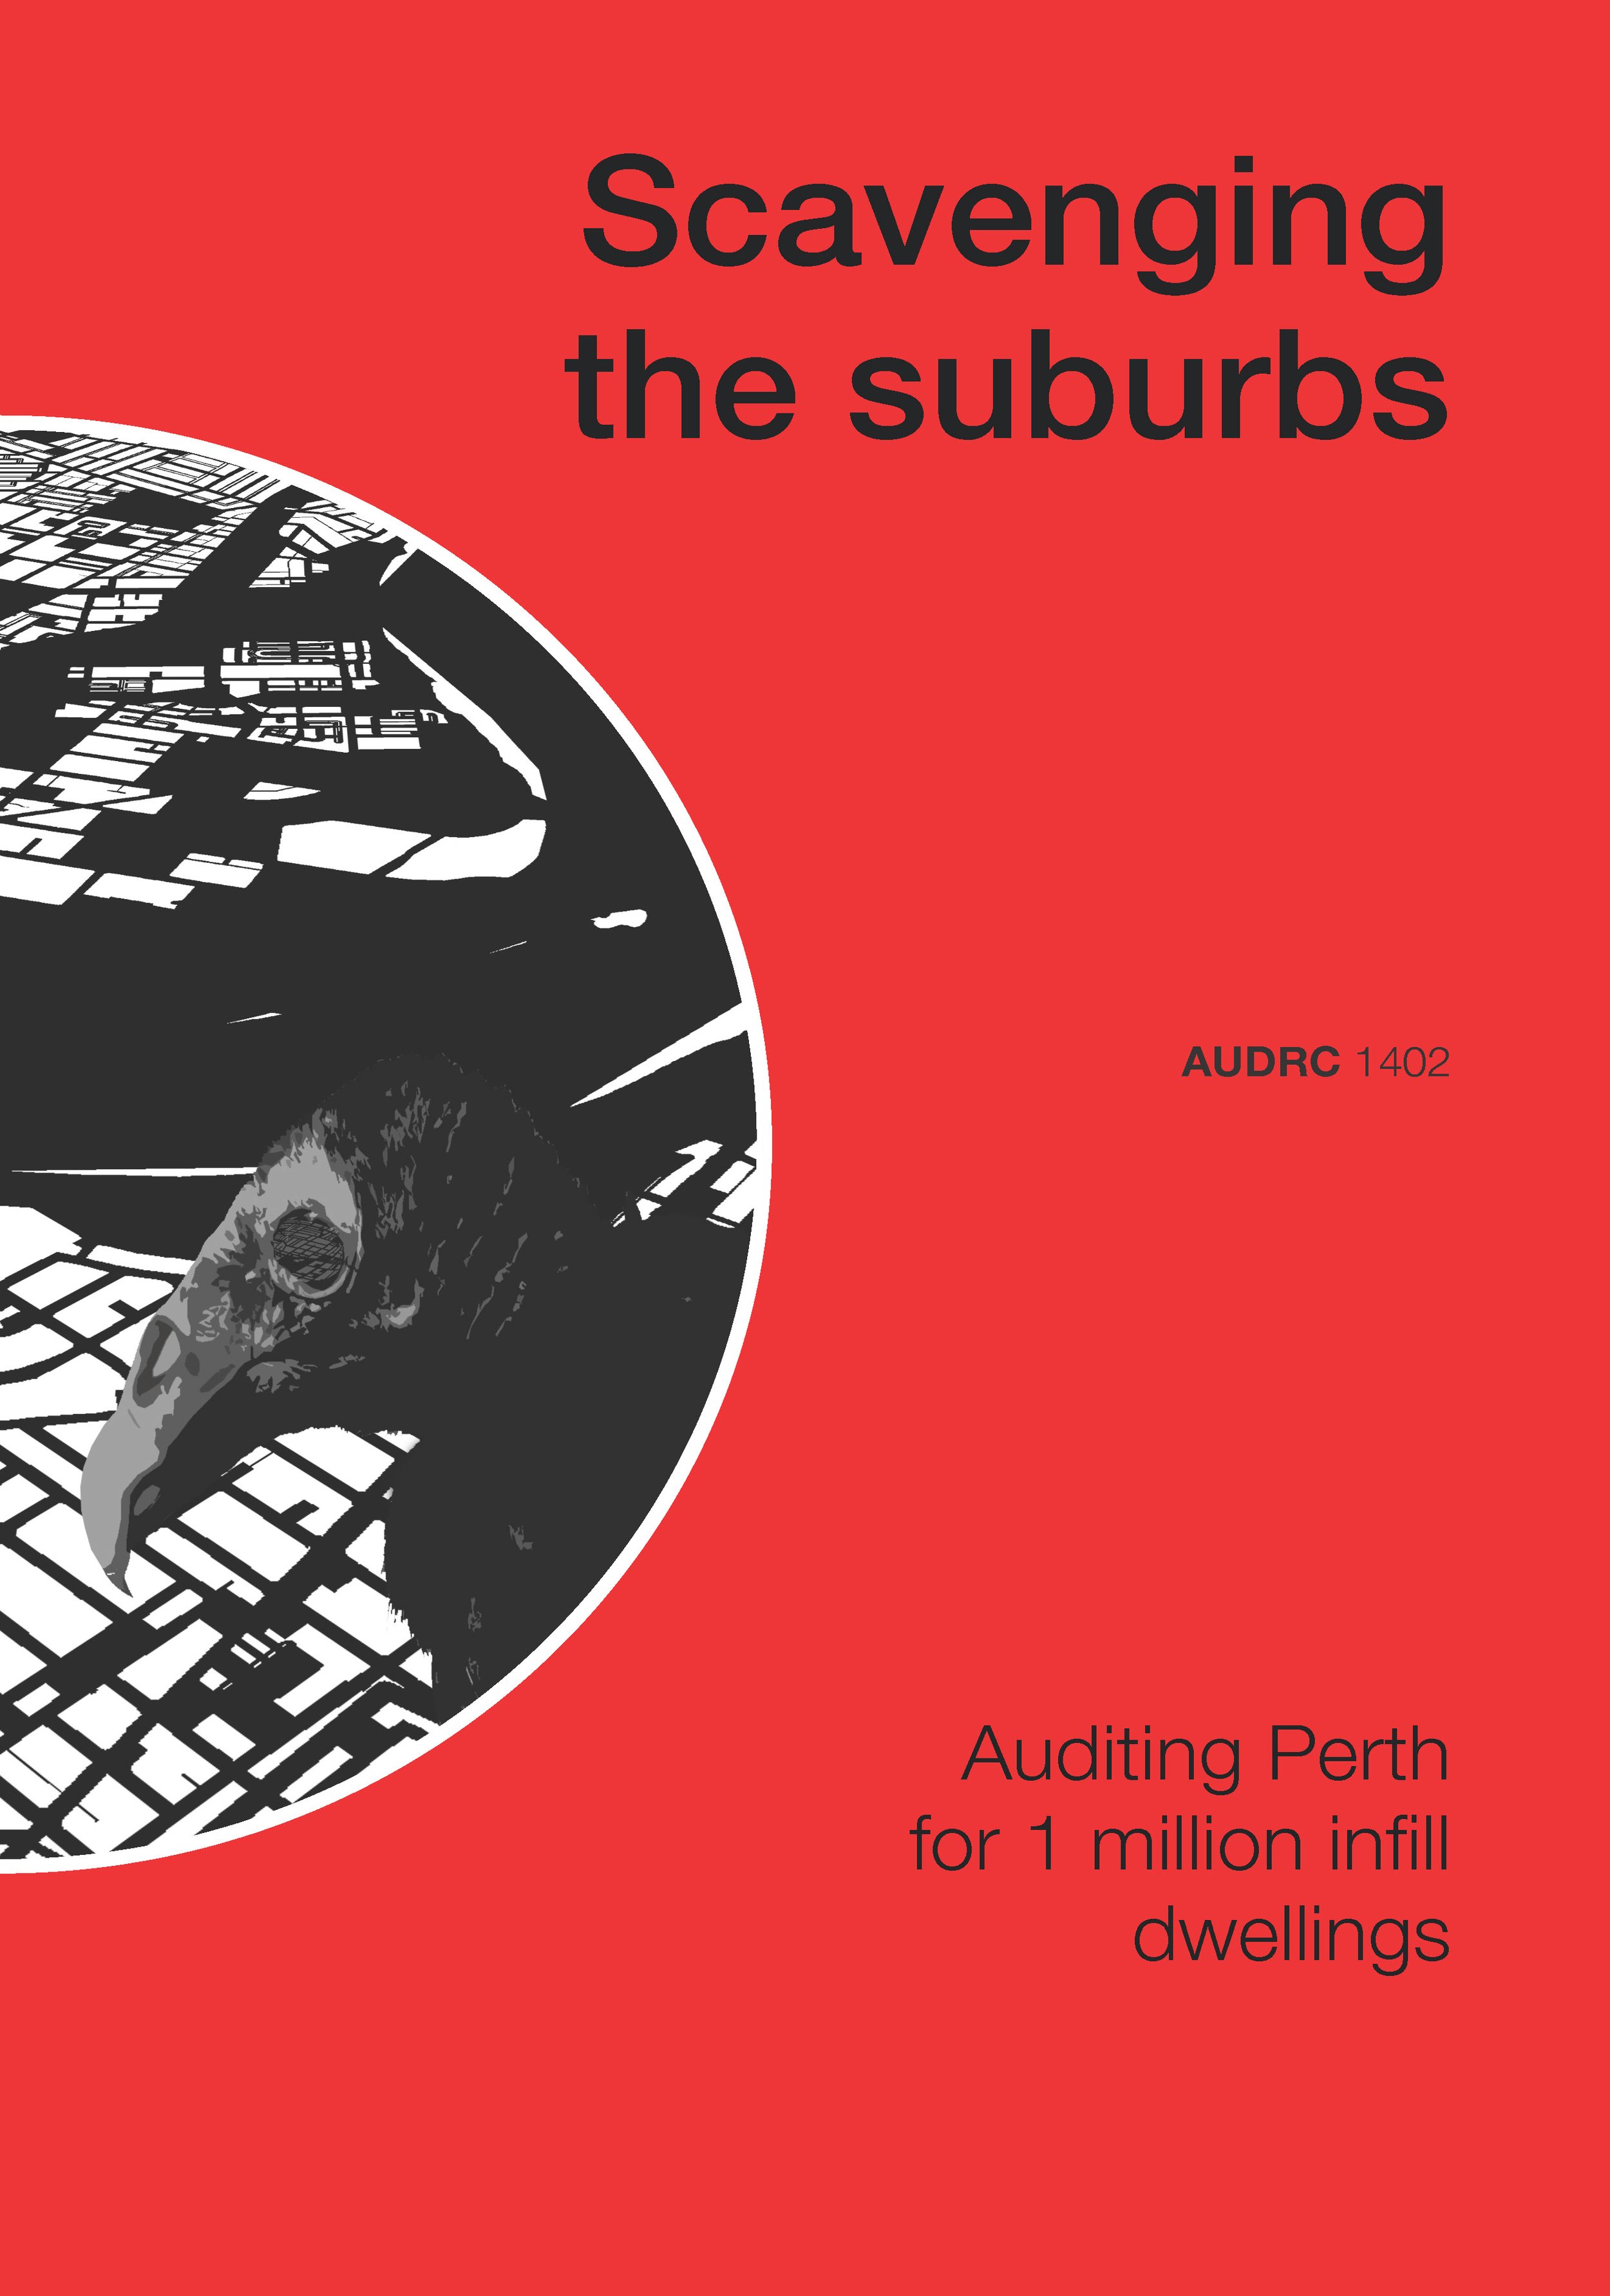 Pages from 2015_Scavenging the suburbs Auditing Perth for 1 million infill dwellings_University of Western Australia Publishing.jpg